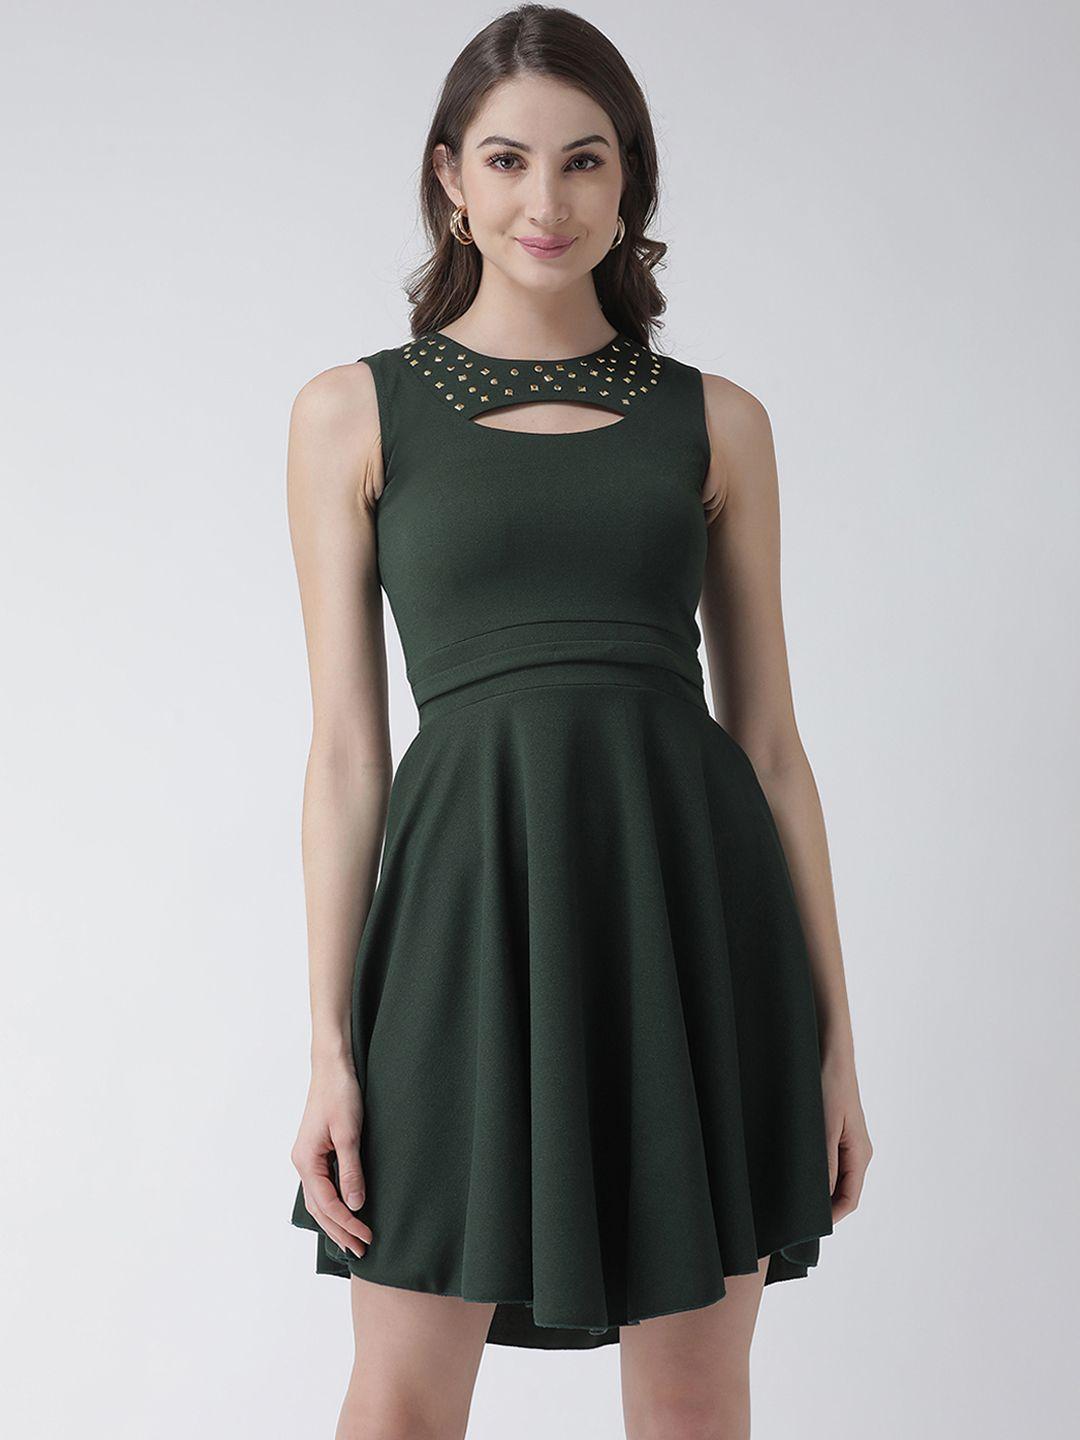 kassually women olive green solid fit and flare dress